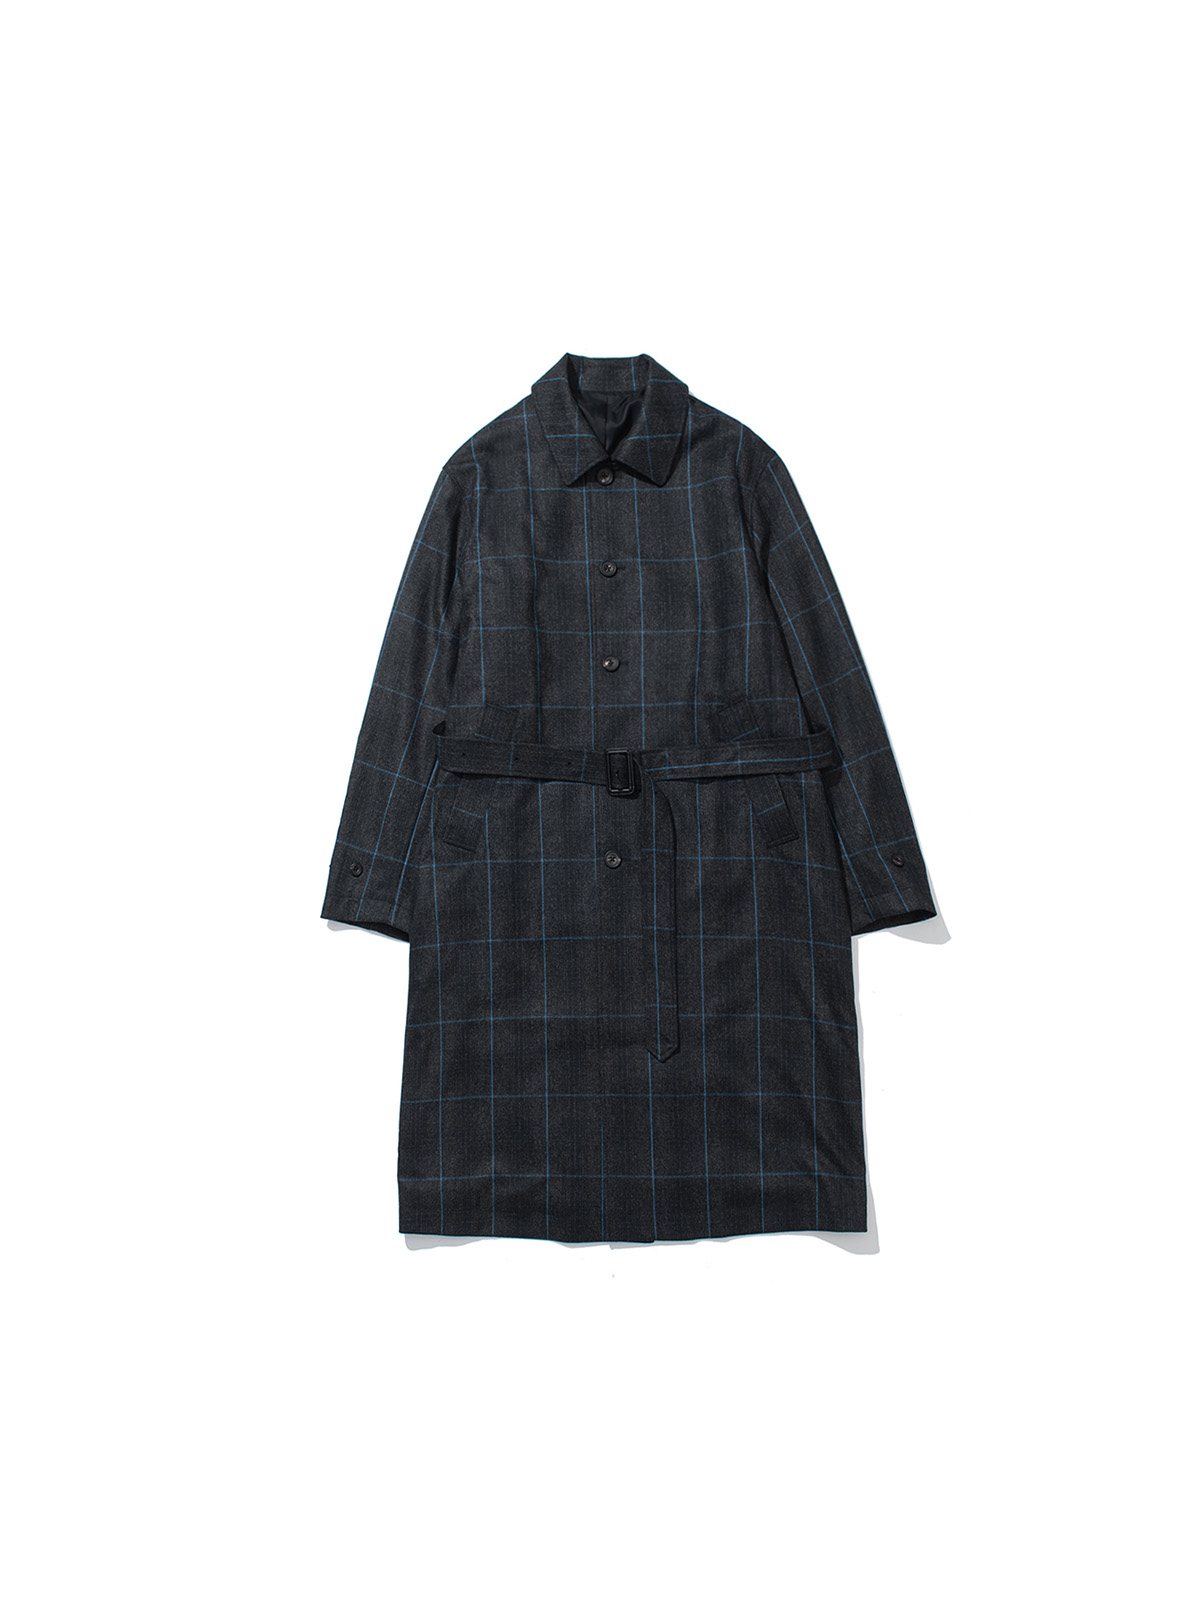 OVERSIZED INVESTIGATED COAT (SHADOW CHECK)